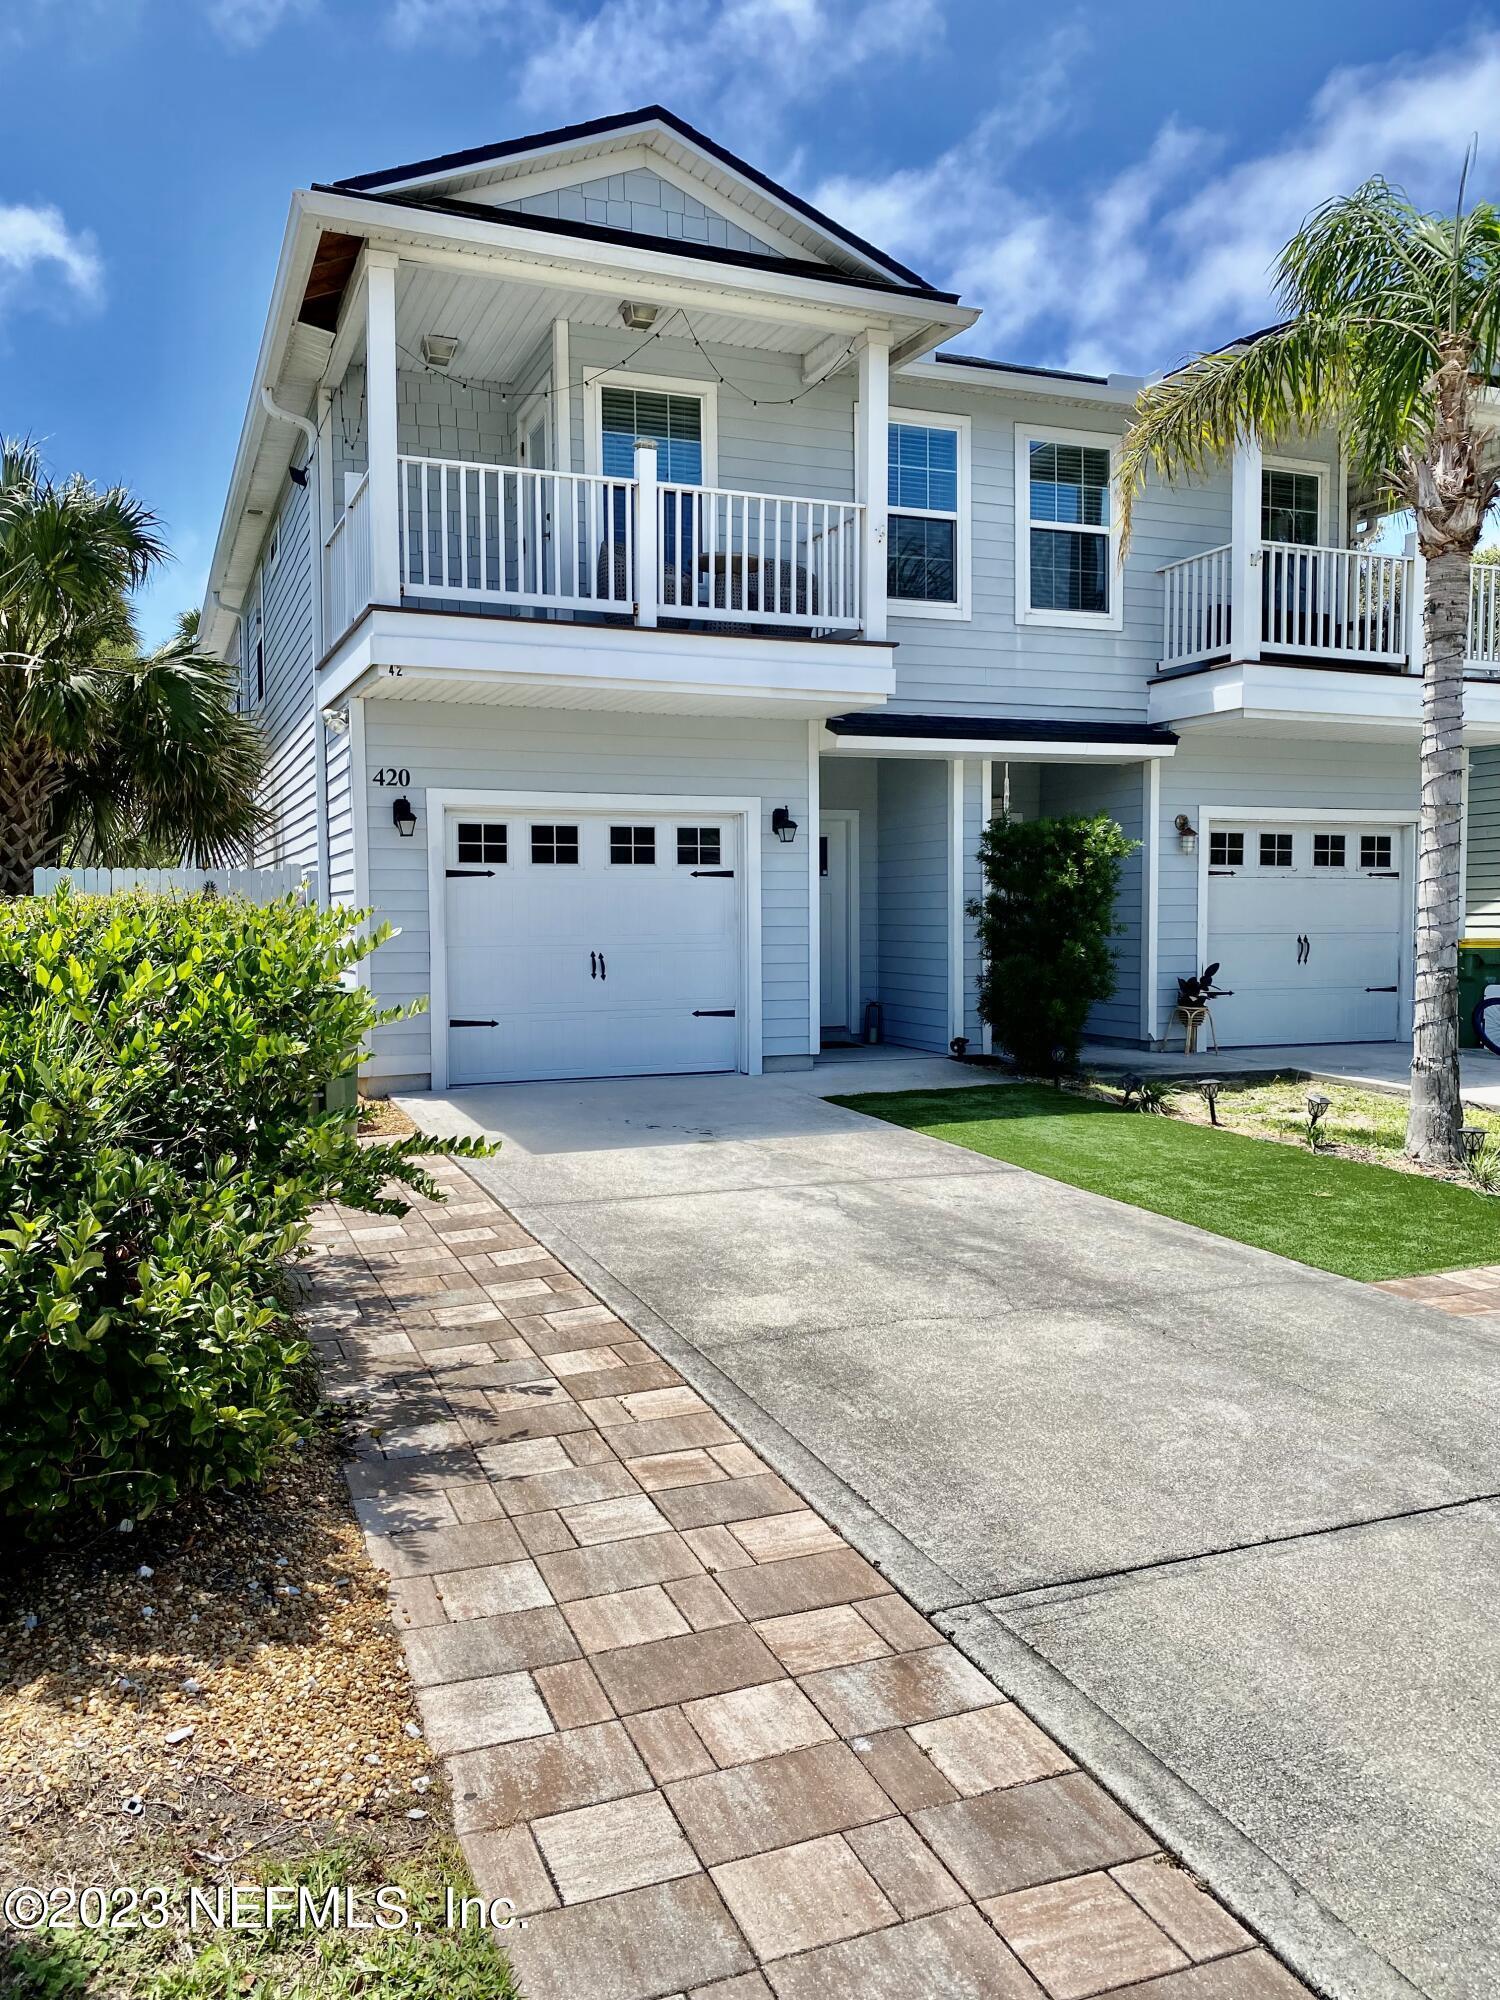 Jacksonville Beach, FL home for sale located at 420 5th Avenue S, Jacksonville Beach, FL 32250